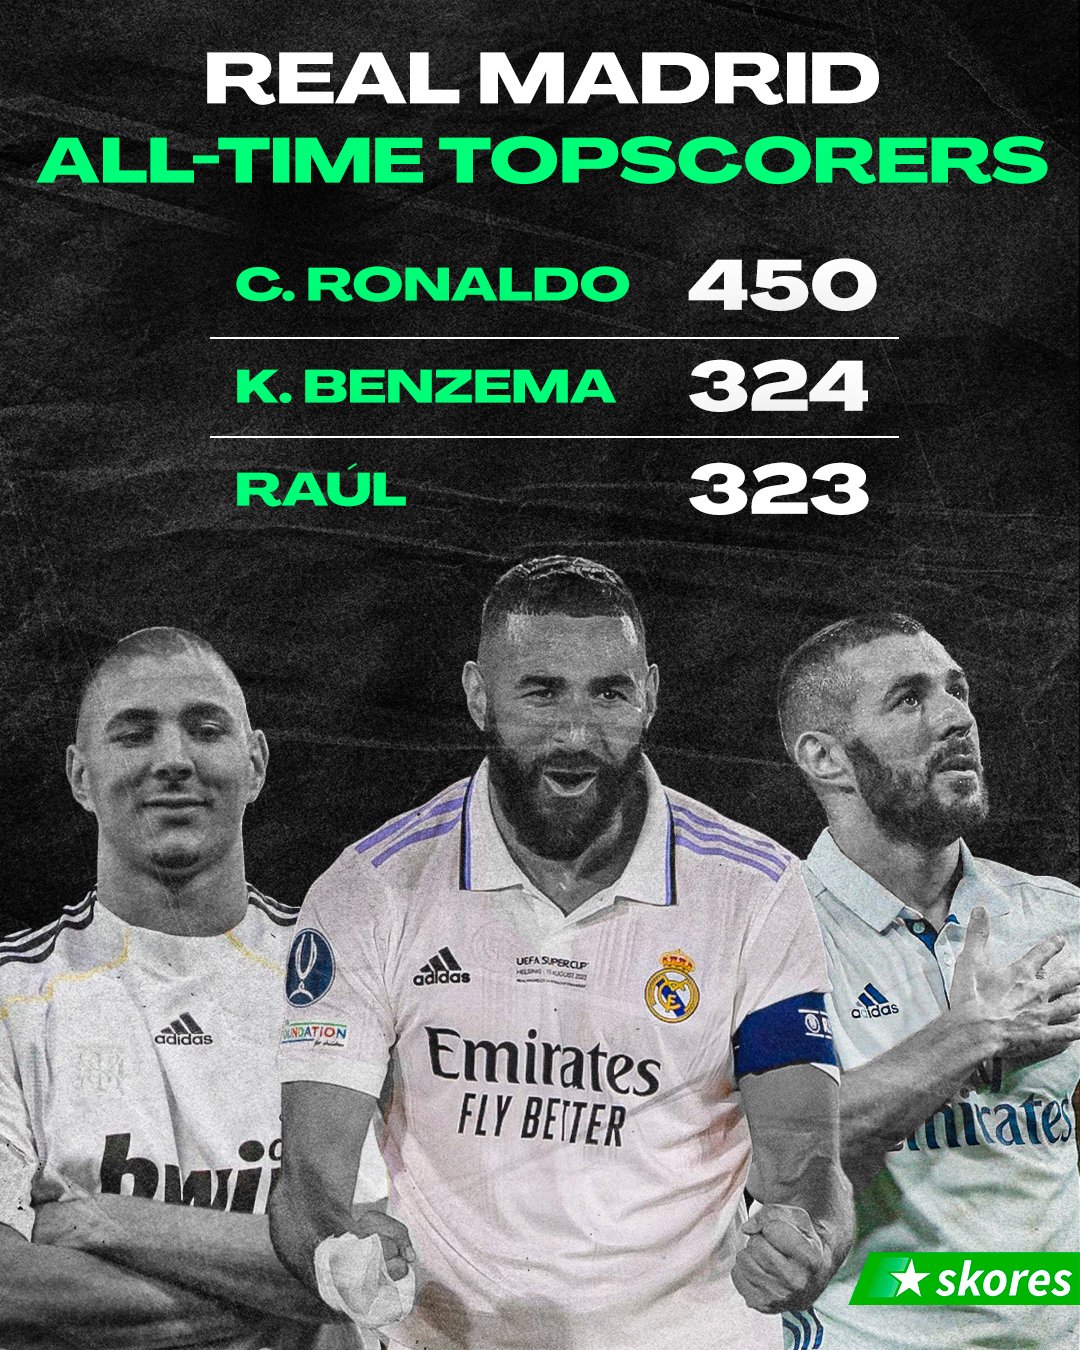 Skores on Twitter: "Karim Benzema is now the Real Madrid's second all-time  top scorer 🔥 Next Cristiano? 👀 https://t.co/mwNLciCEQF" / Twitter